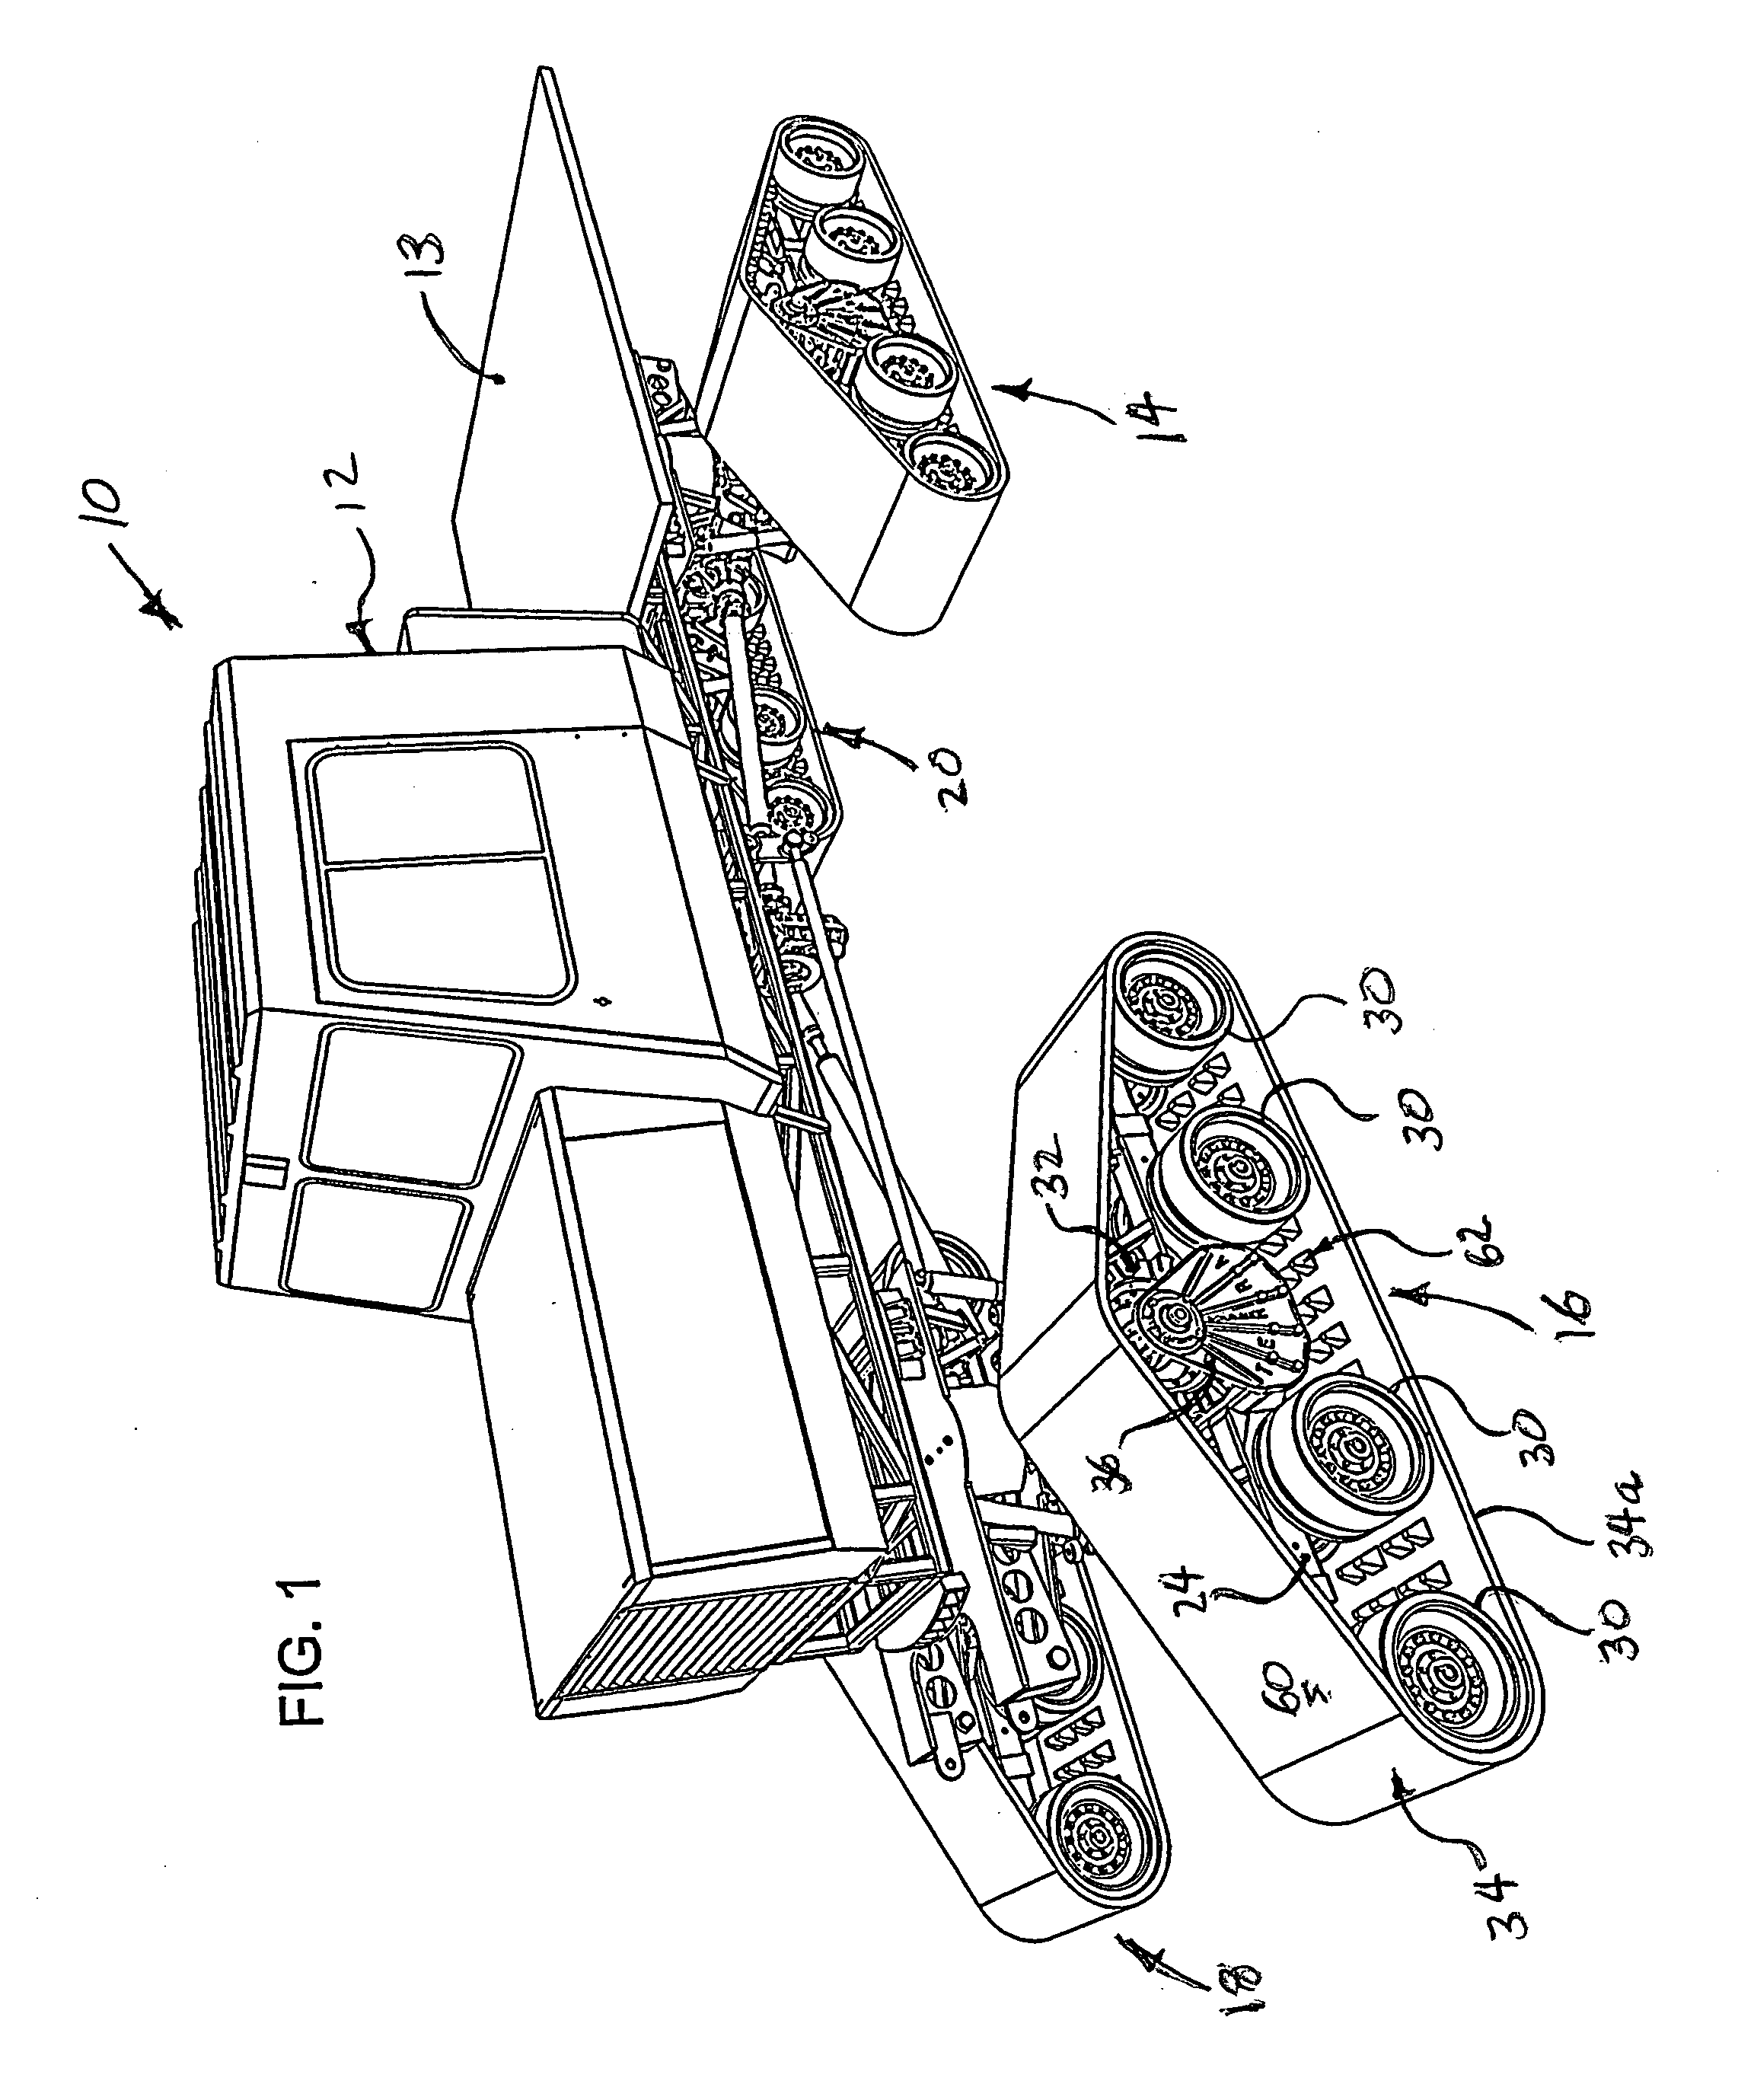 Tracked vehicle with improved track drive unit